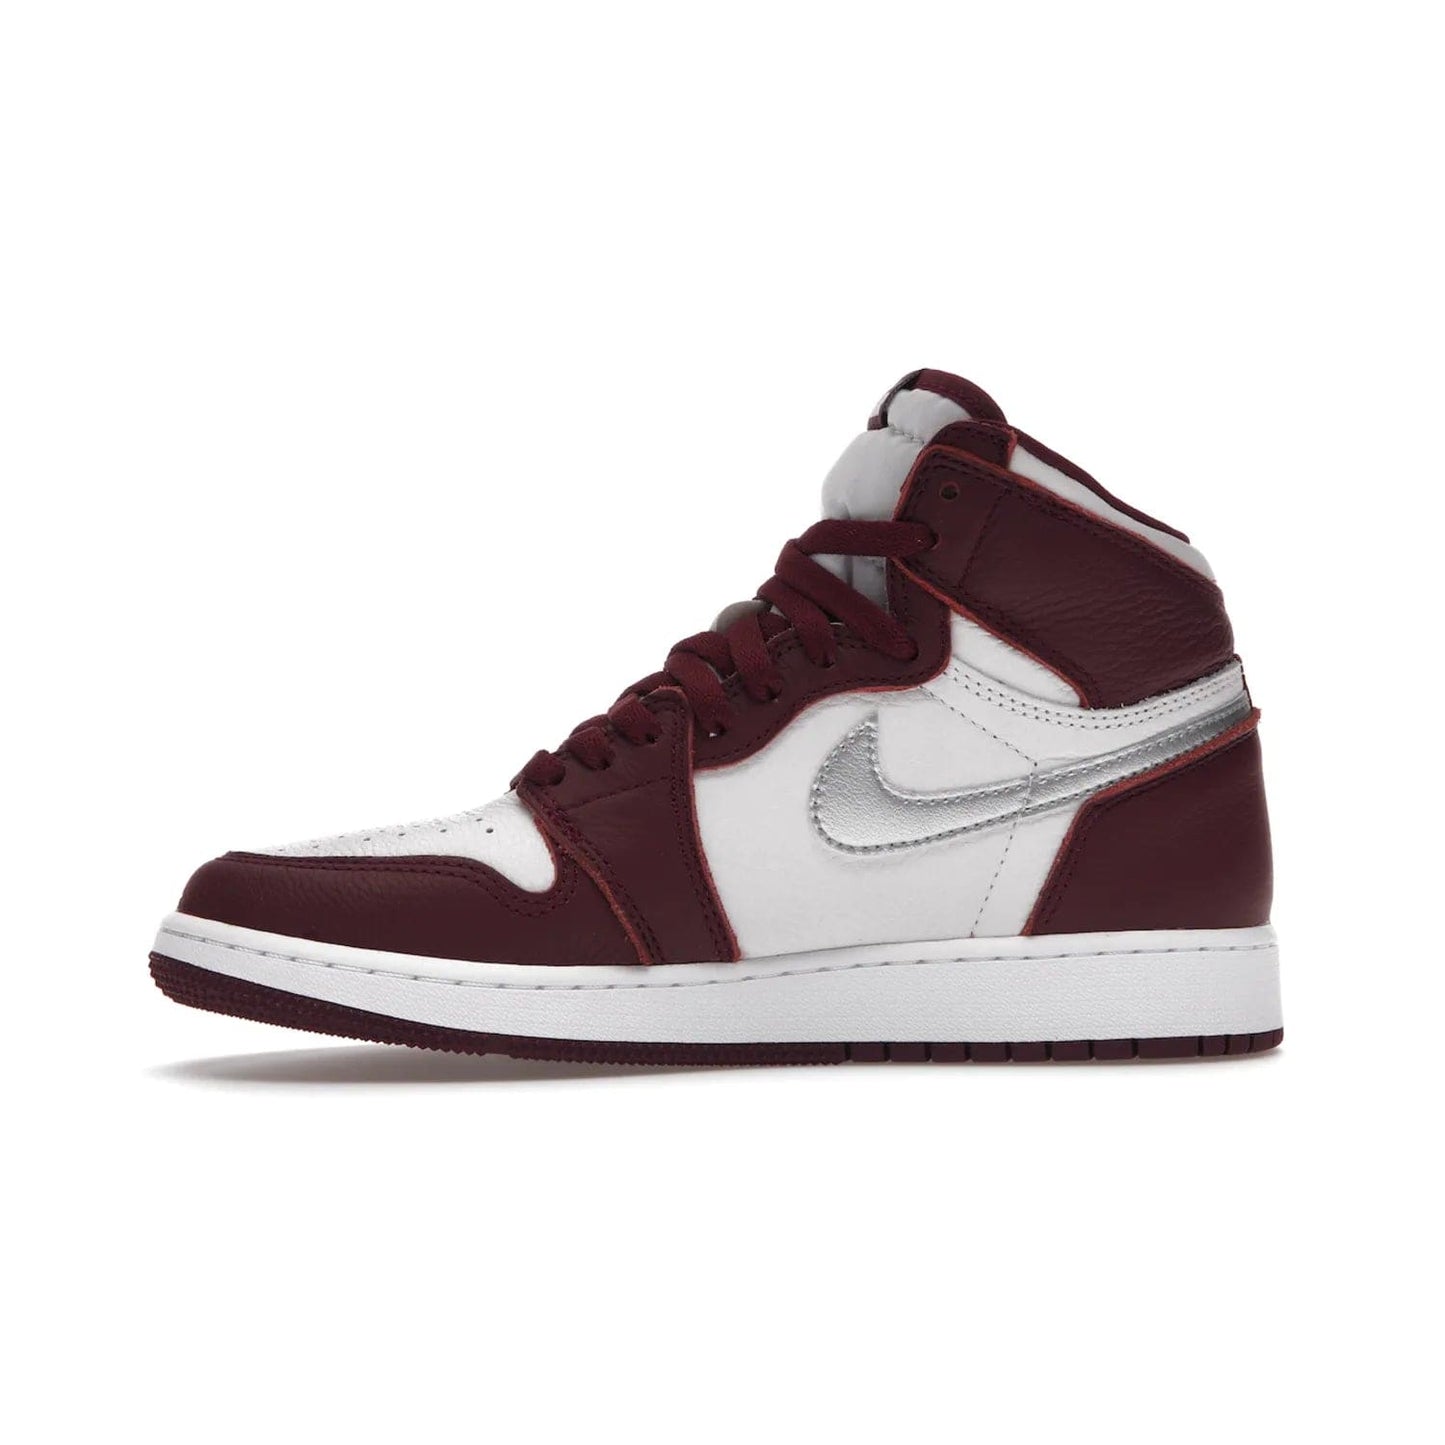 Jordan 1 Retro High OG Bordeaux (GS) - Image 18 - Only at www.BallersClubKickz.com - #
Introducing the Air Jordan 1 Retro High OG Bordeaux GS – a signature colorway part of the Jordan Brand Fall 2021 lineup. White leather upper & Bordeaux overlays, metallic silver swoosh, jeweled Air Jordan Wings logo & more. Step up your style game with this sleek fall season silhouette.